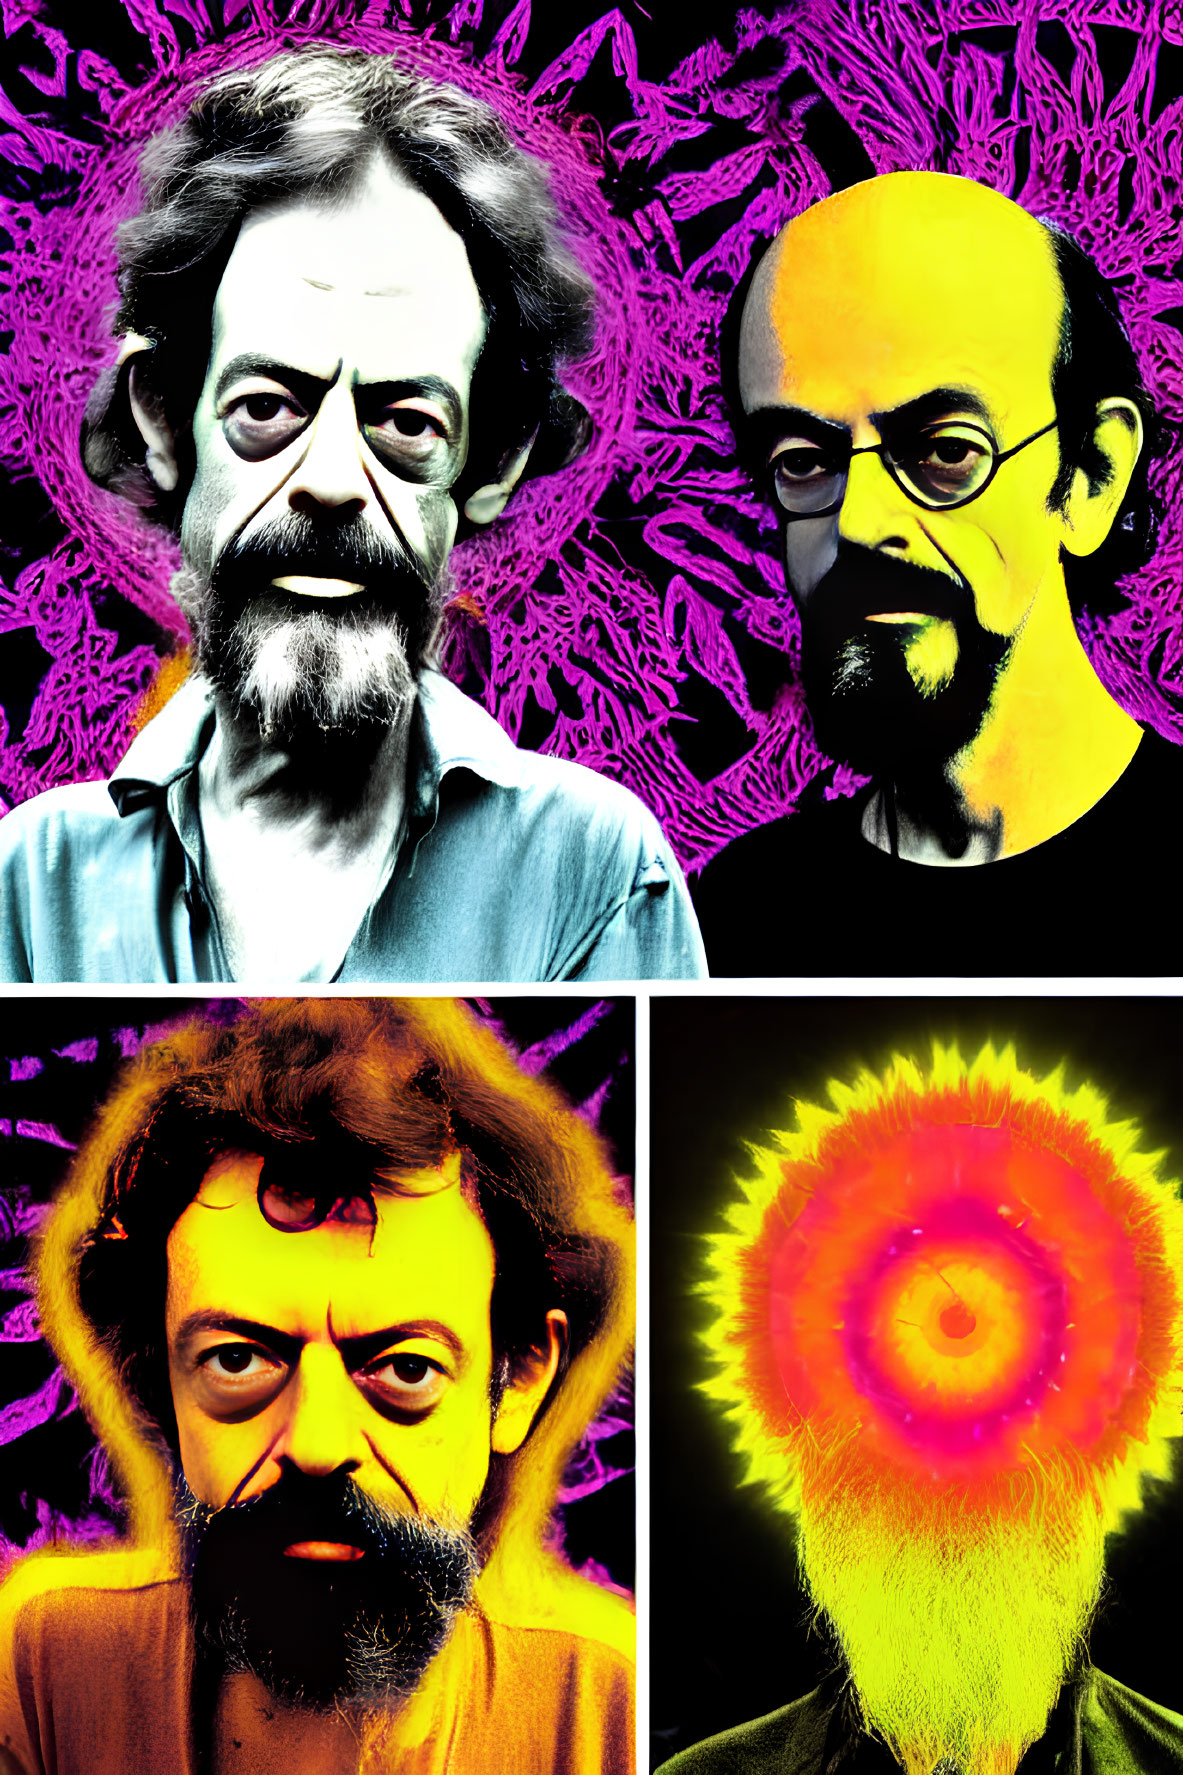 Stylized portraits of a man with beard and glasses on vibrant backgrounds